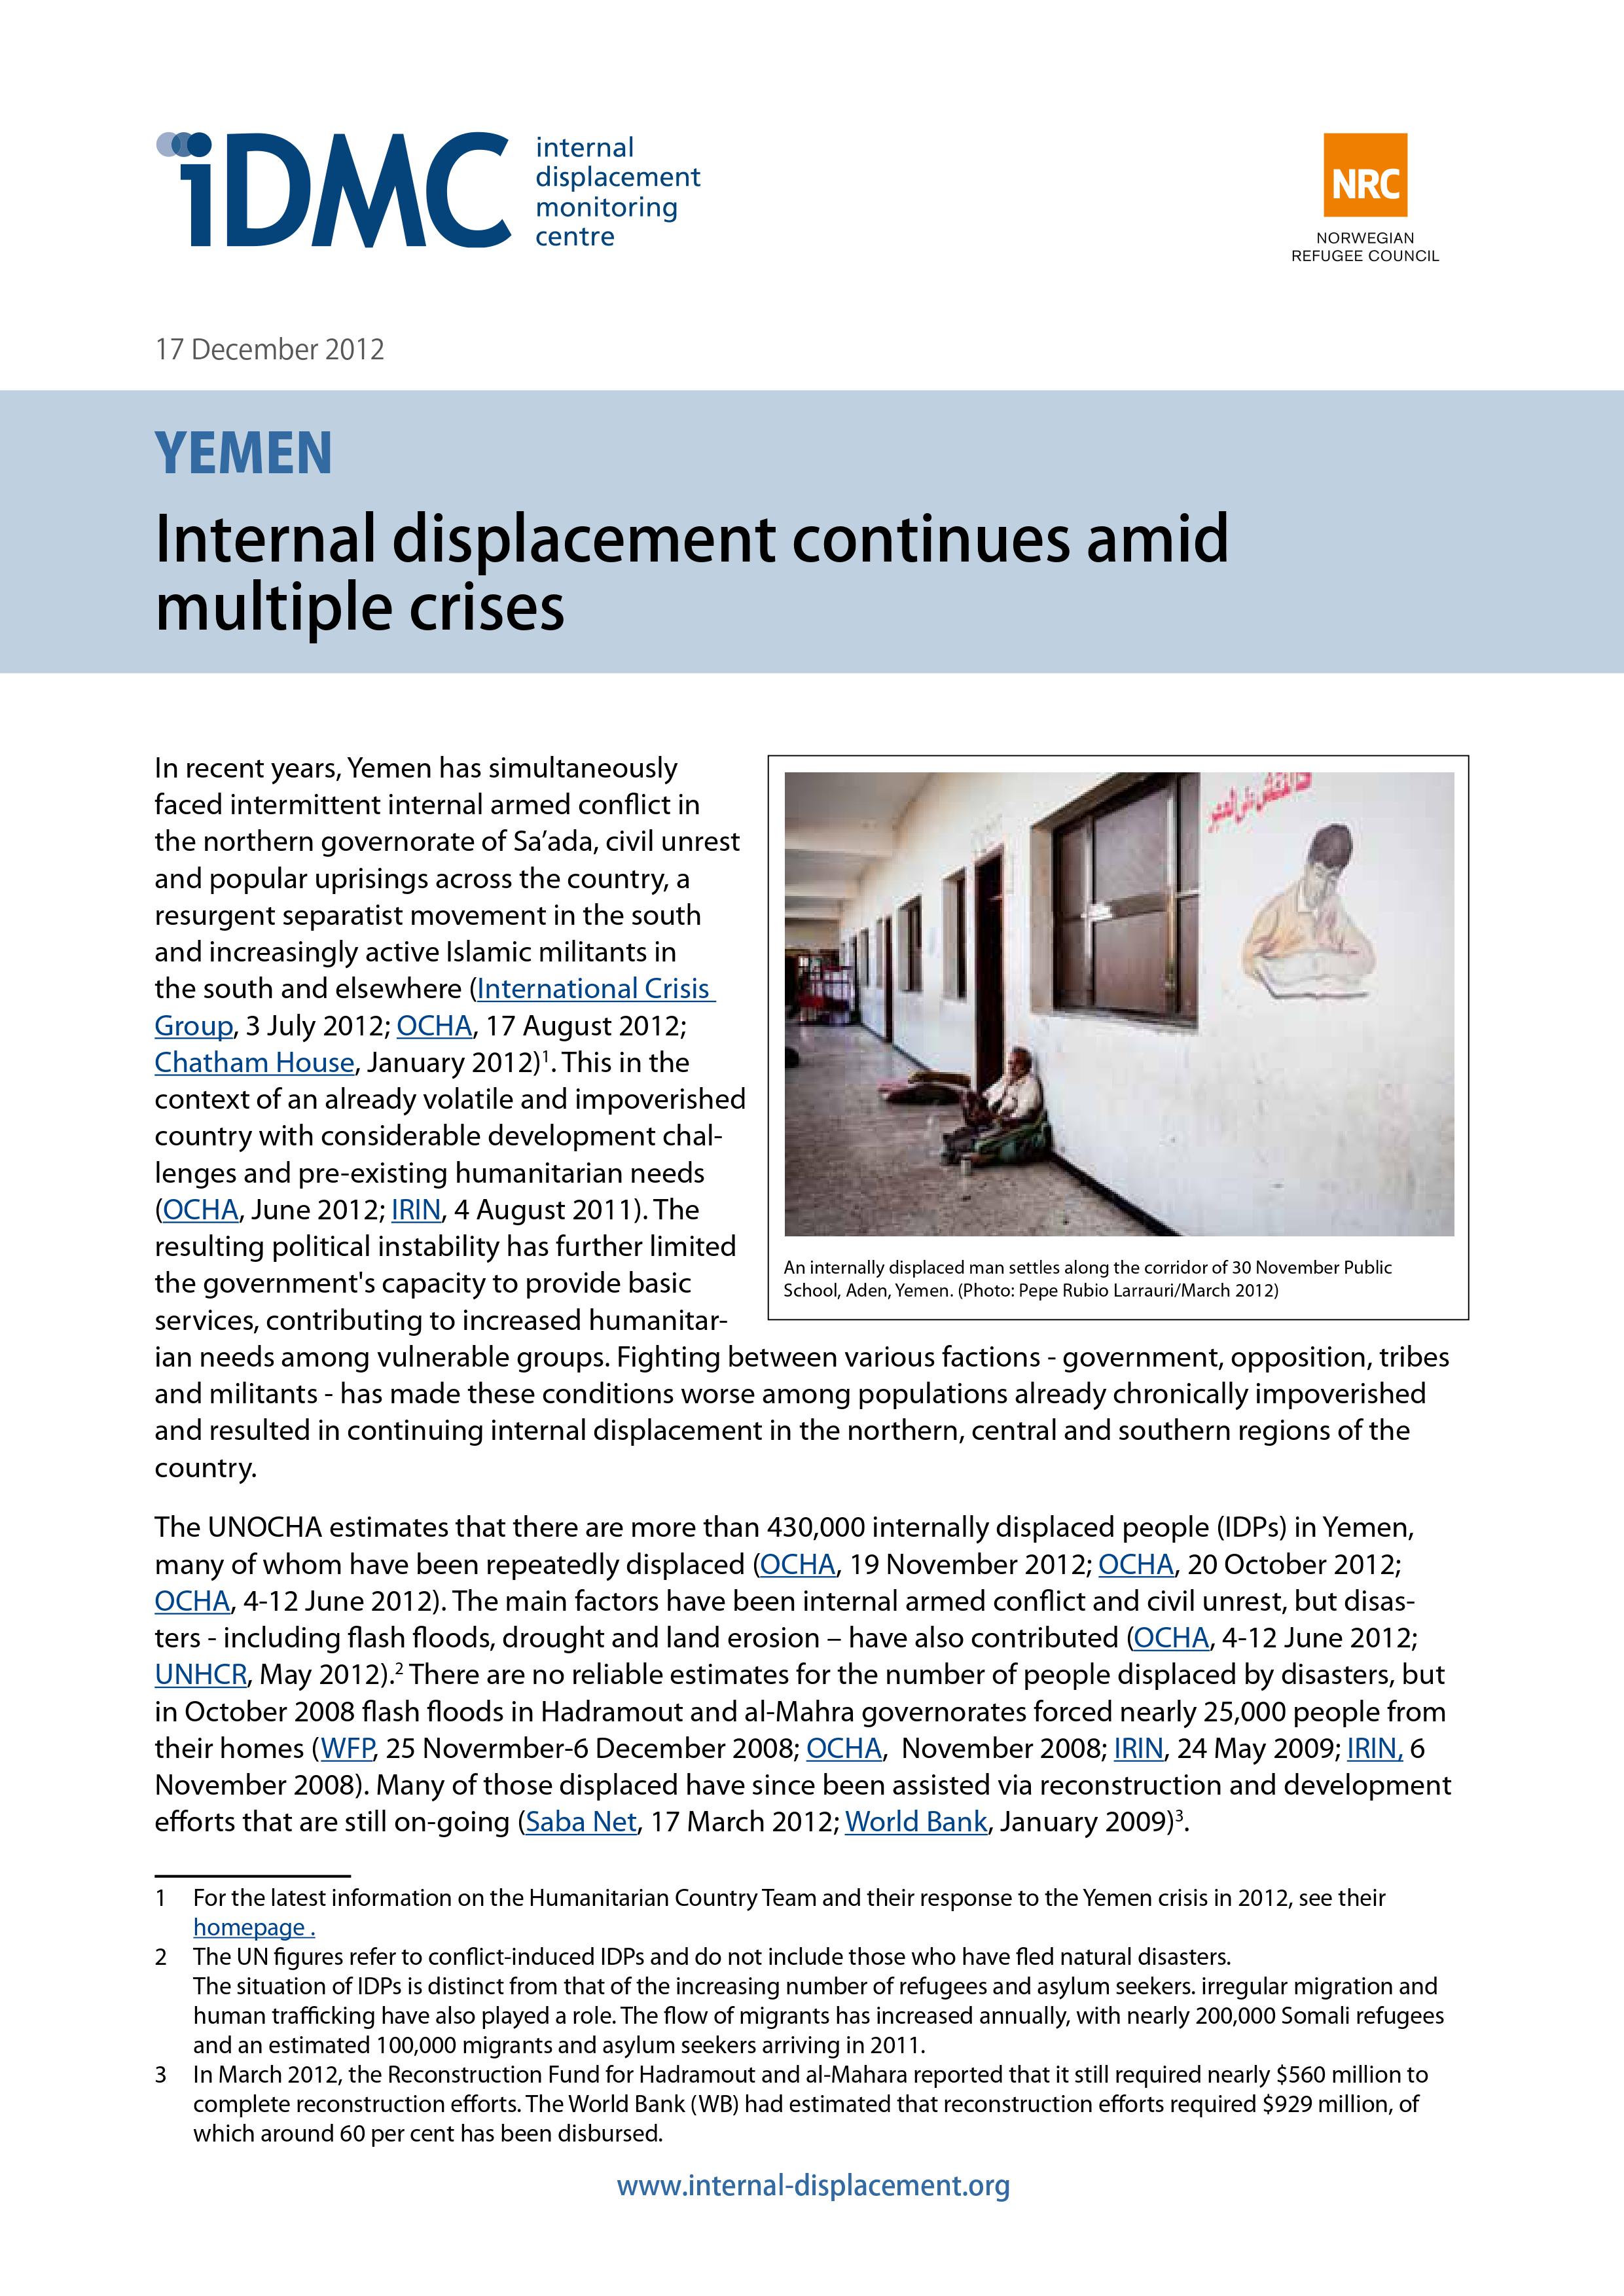 Internal displacement continues amid multiple crises